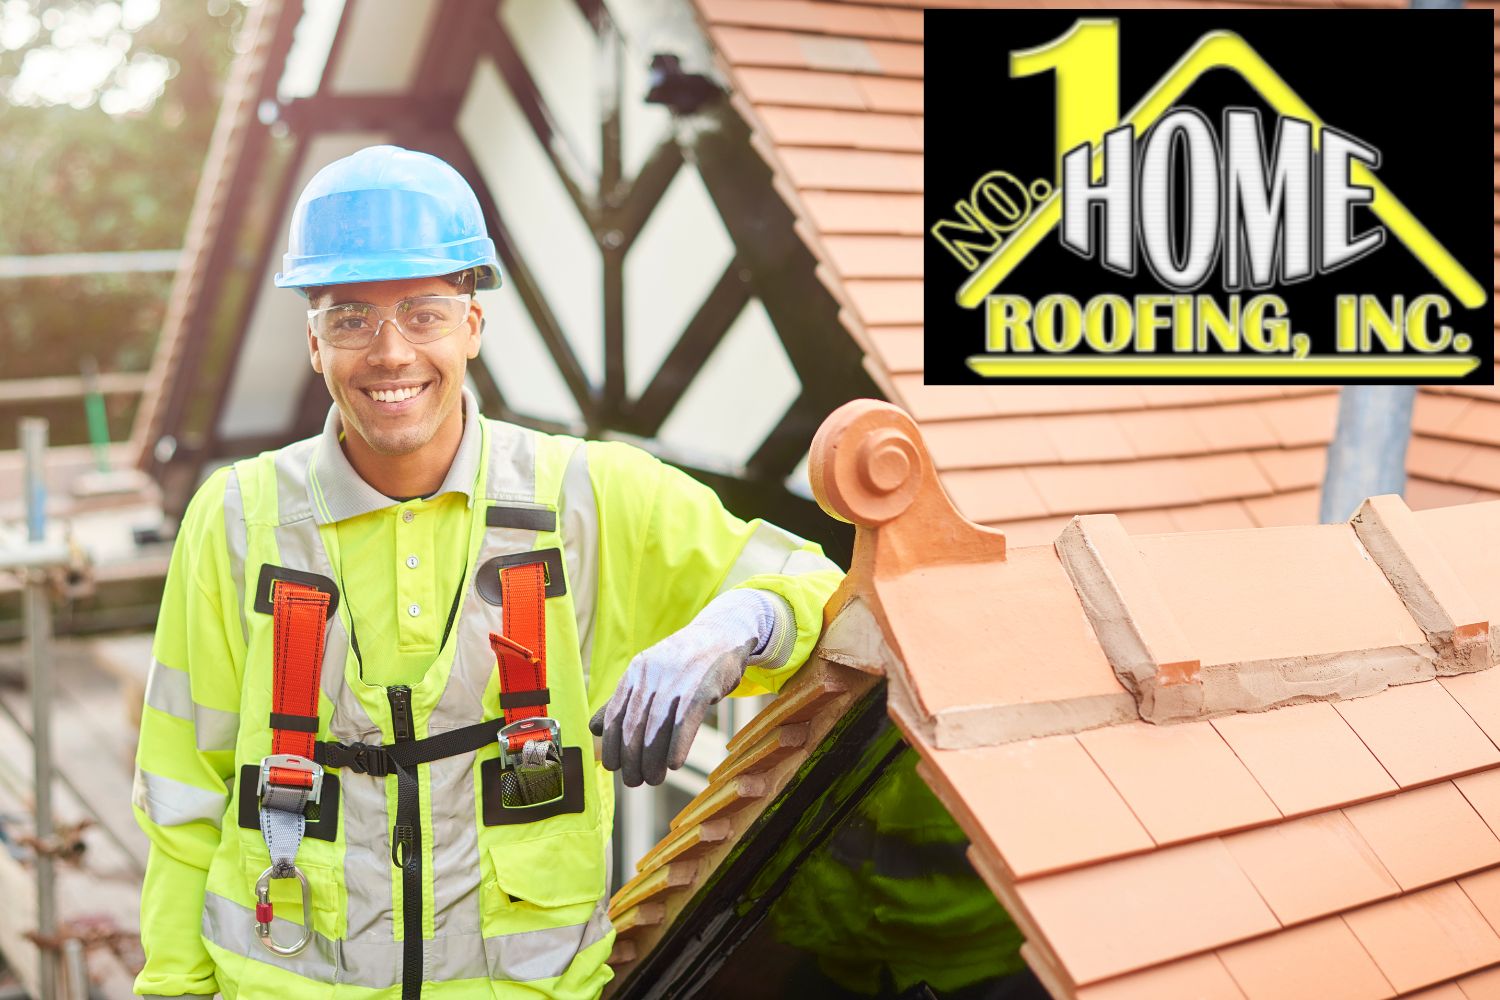 no1 home roofing photo